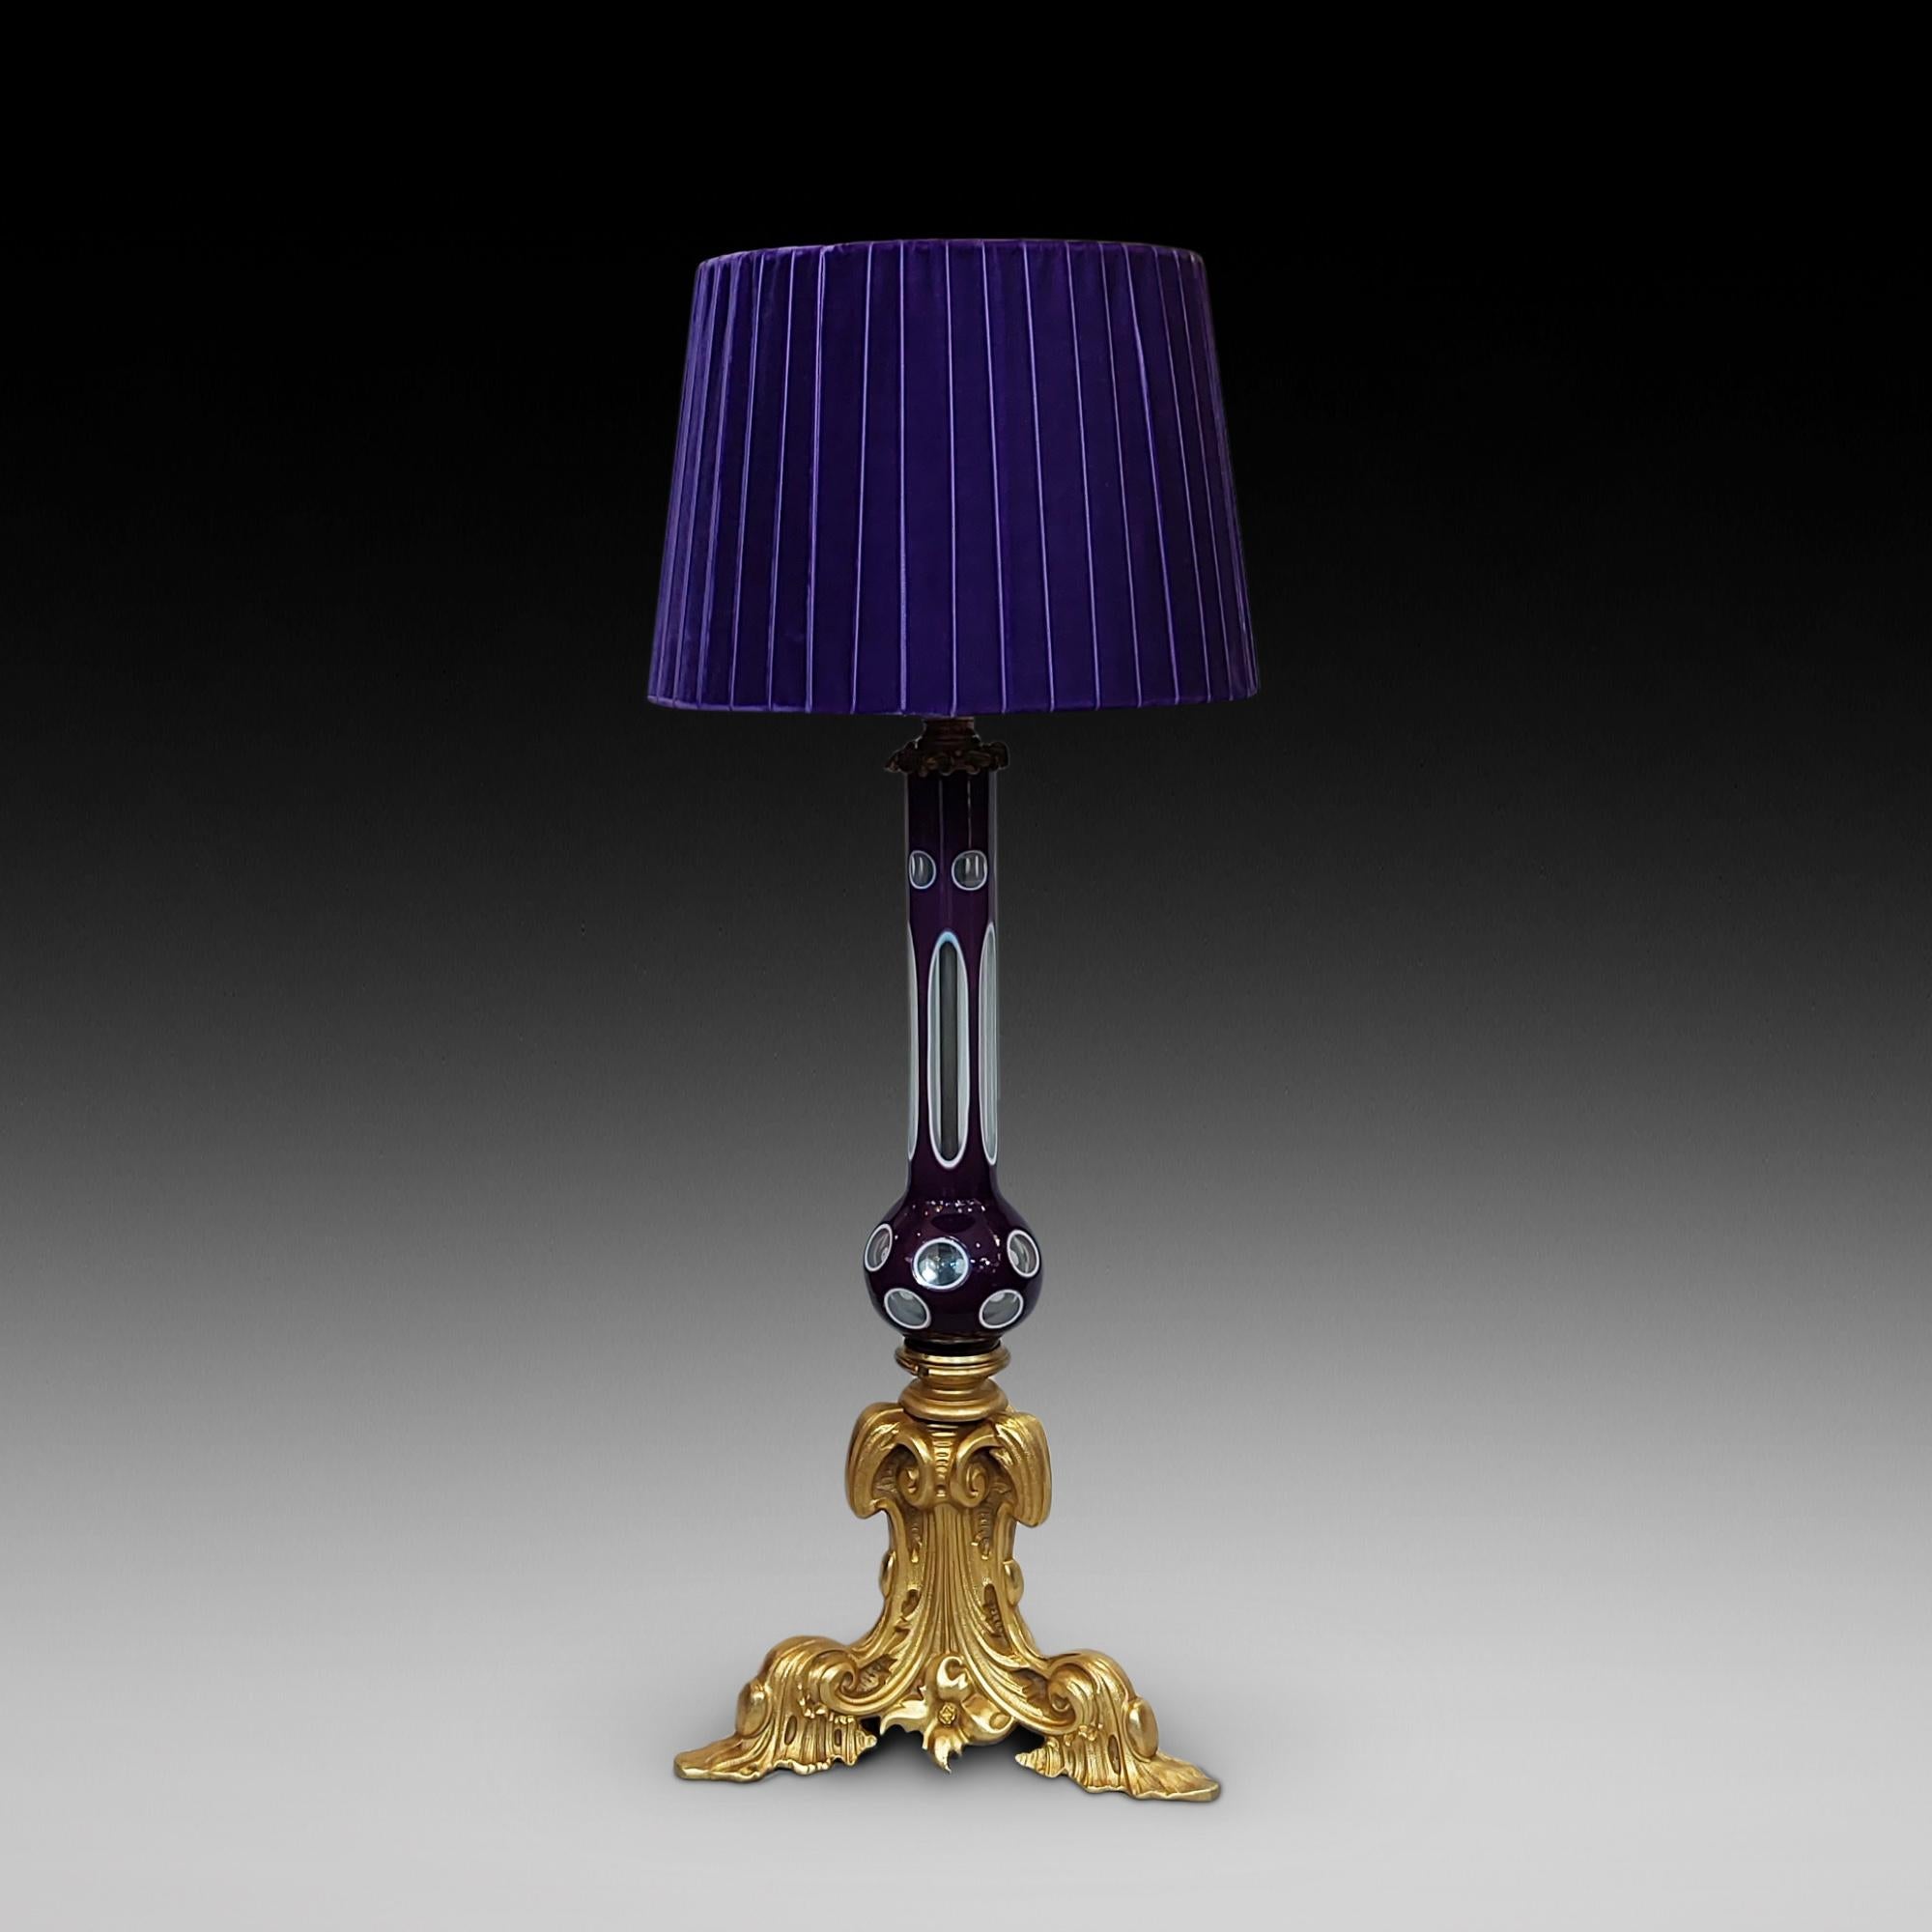 Rococo Revival Early 20thC Gilt Bronze and Murano Glass Table Lamp